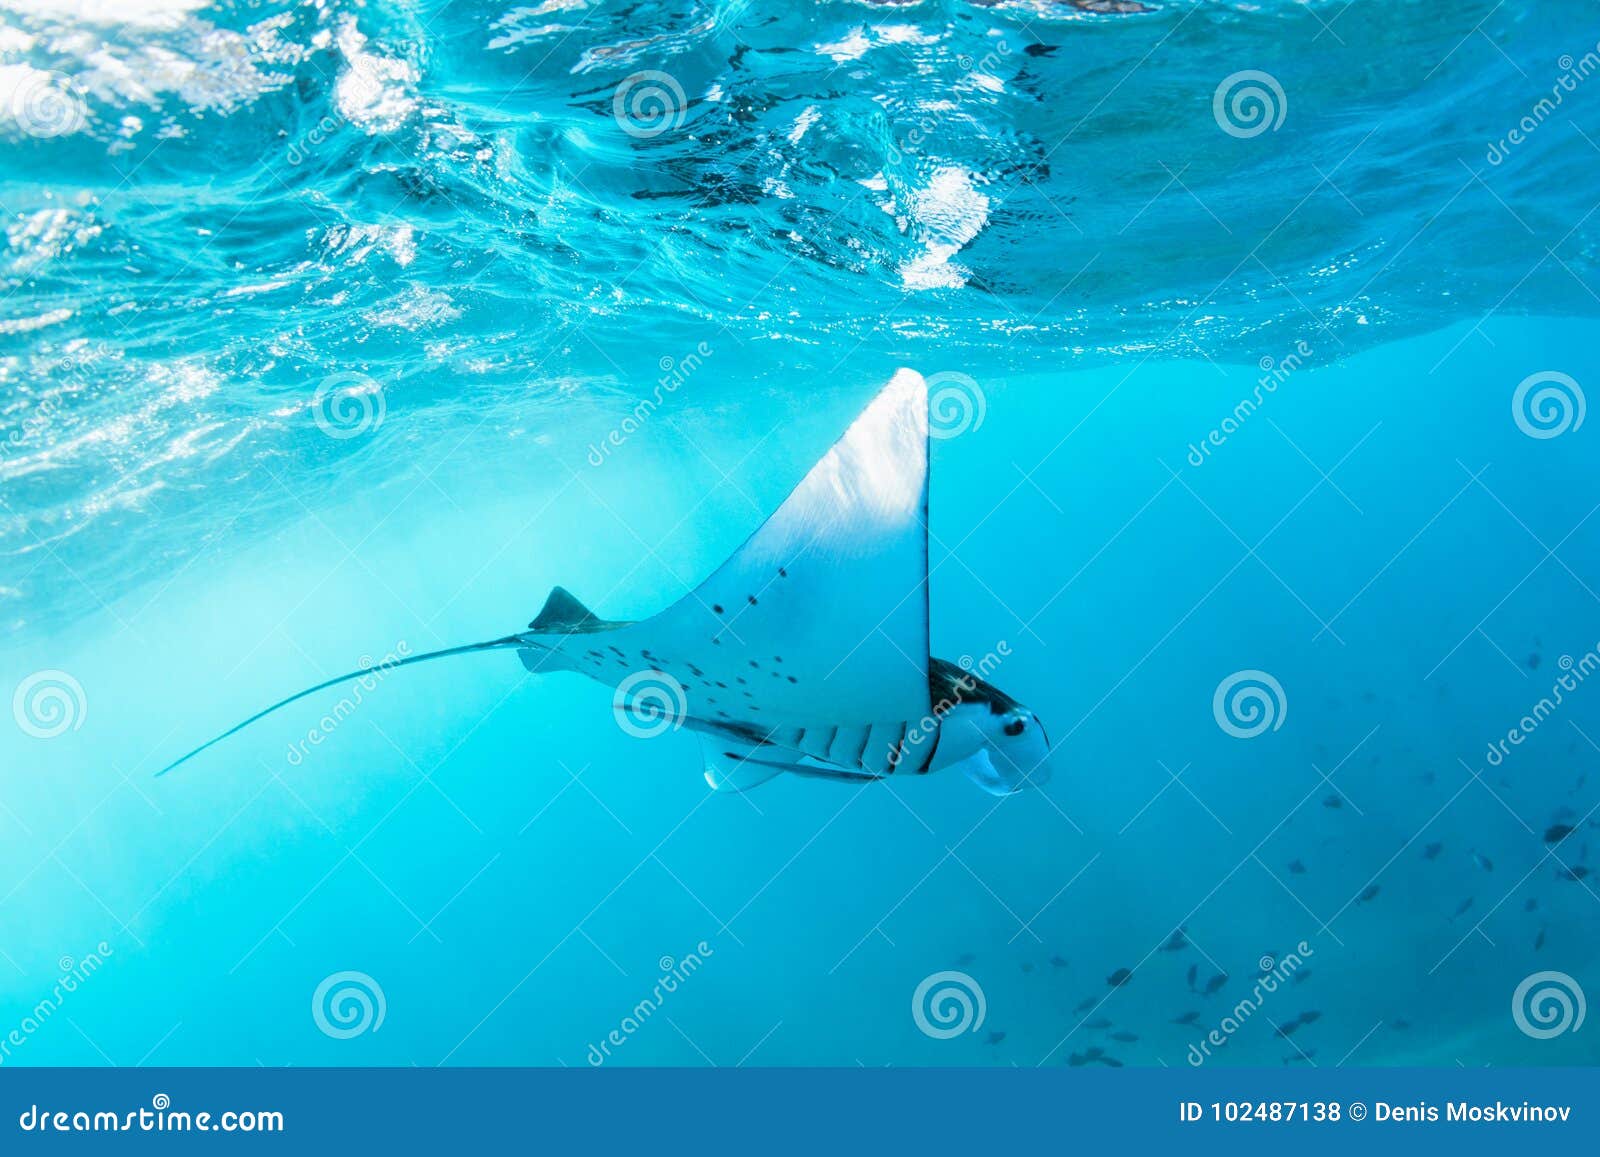 underwater view of hovering giant oceanic manta ray